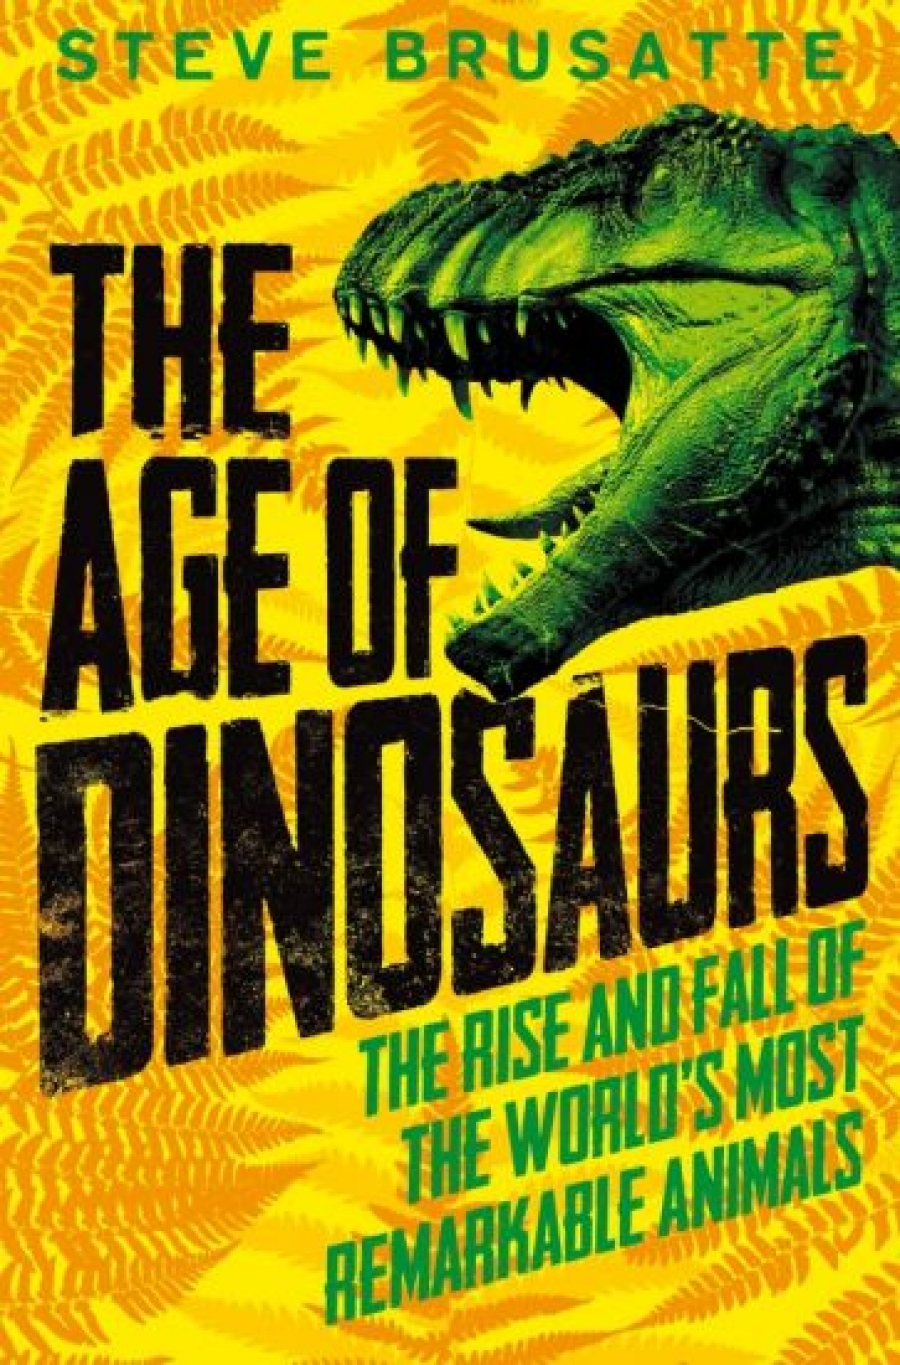 Brusatte Steve The Age of Dinosaurs. The Rise and Fall of the World's Most Remarkable Animals 